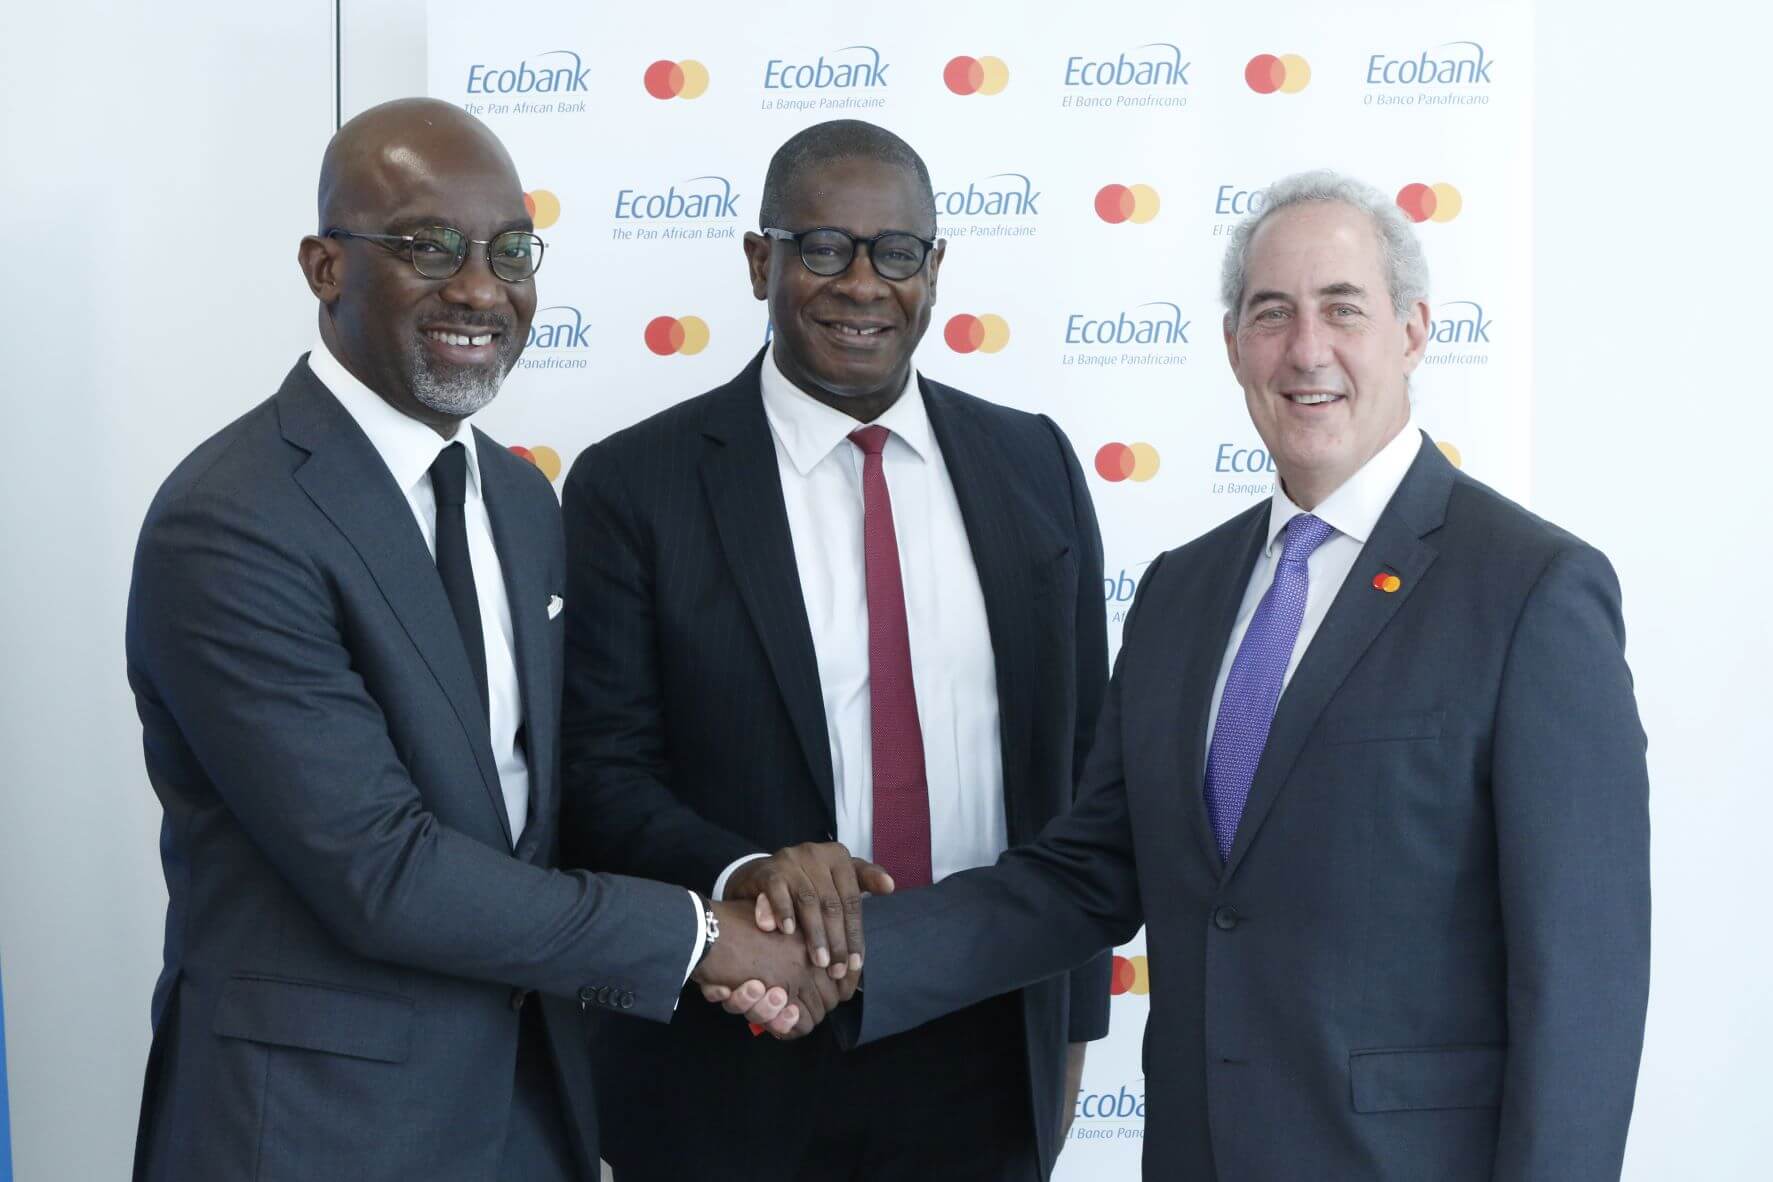 Mastercard and Ecobank Group partner to digitize agricultural value chains in Africa and empower millions of smallholder farmers through digital and financial inclusion